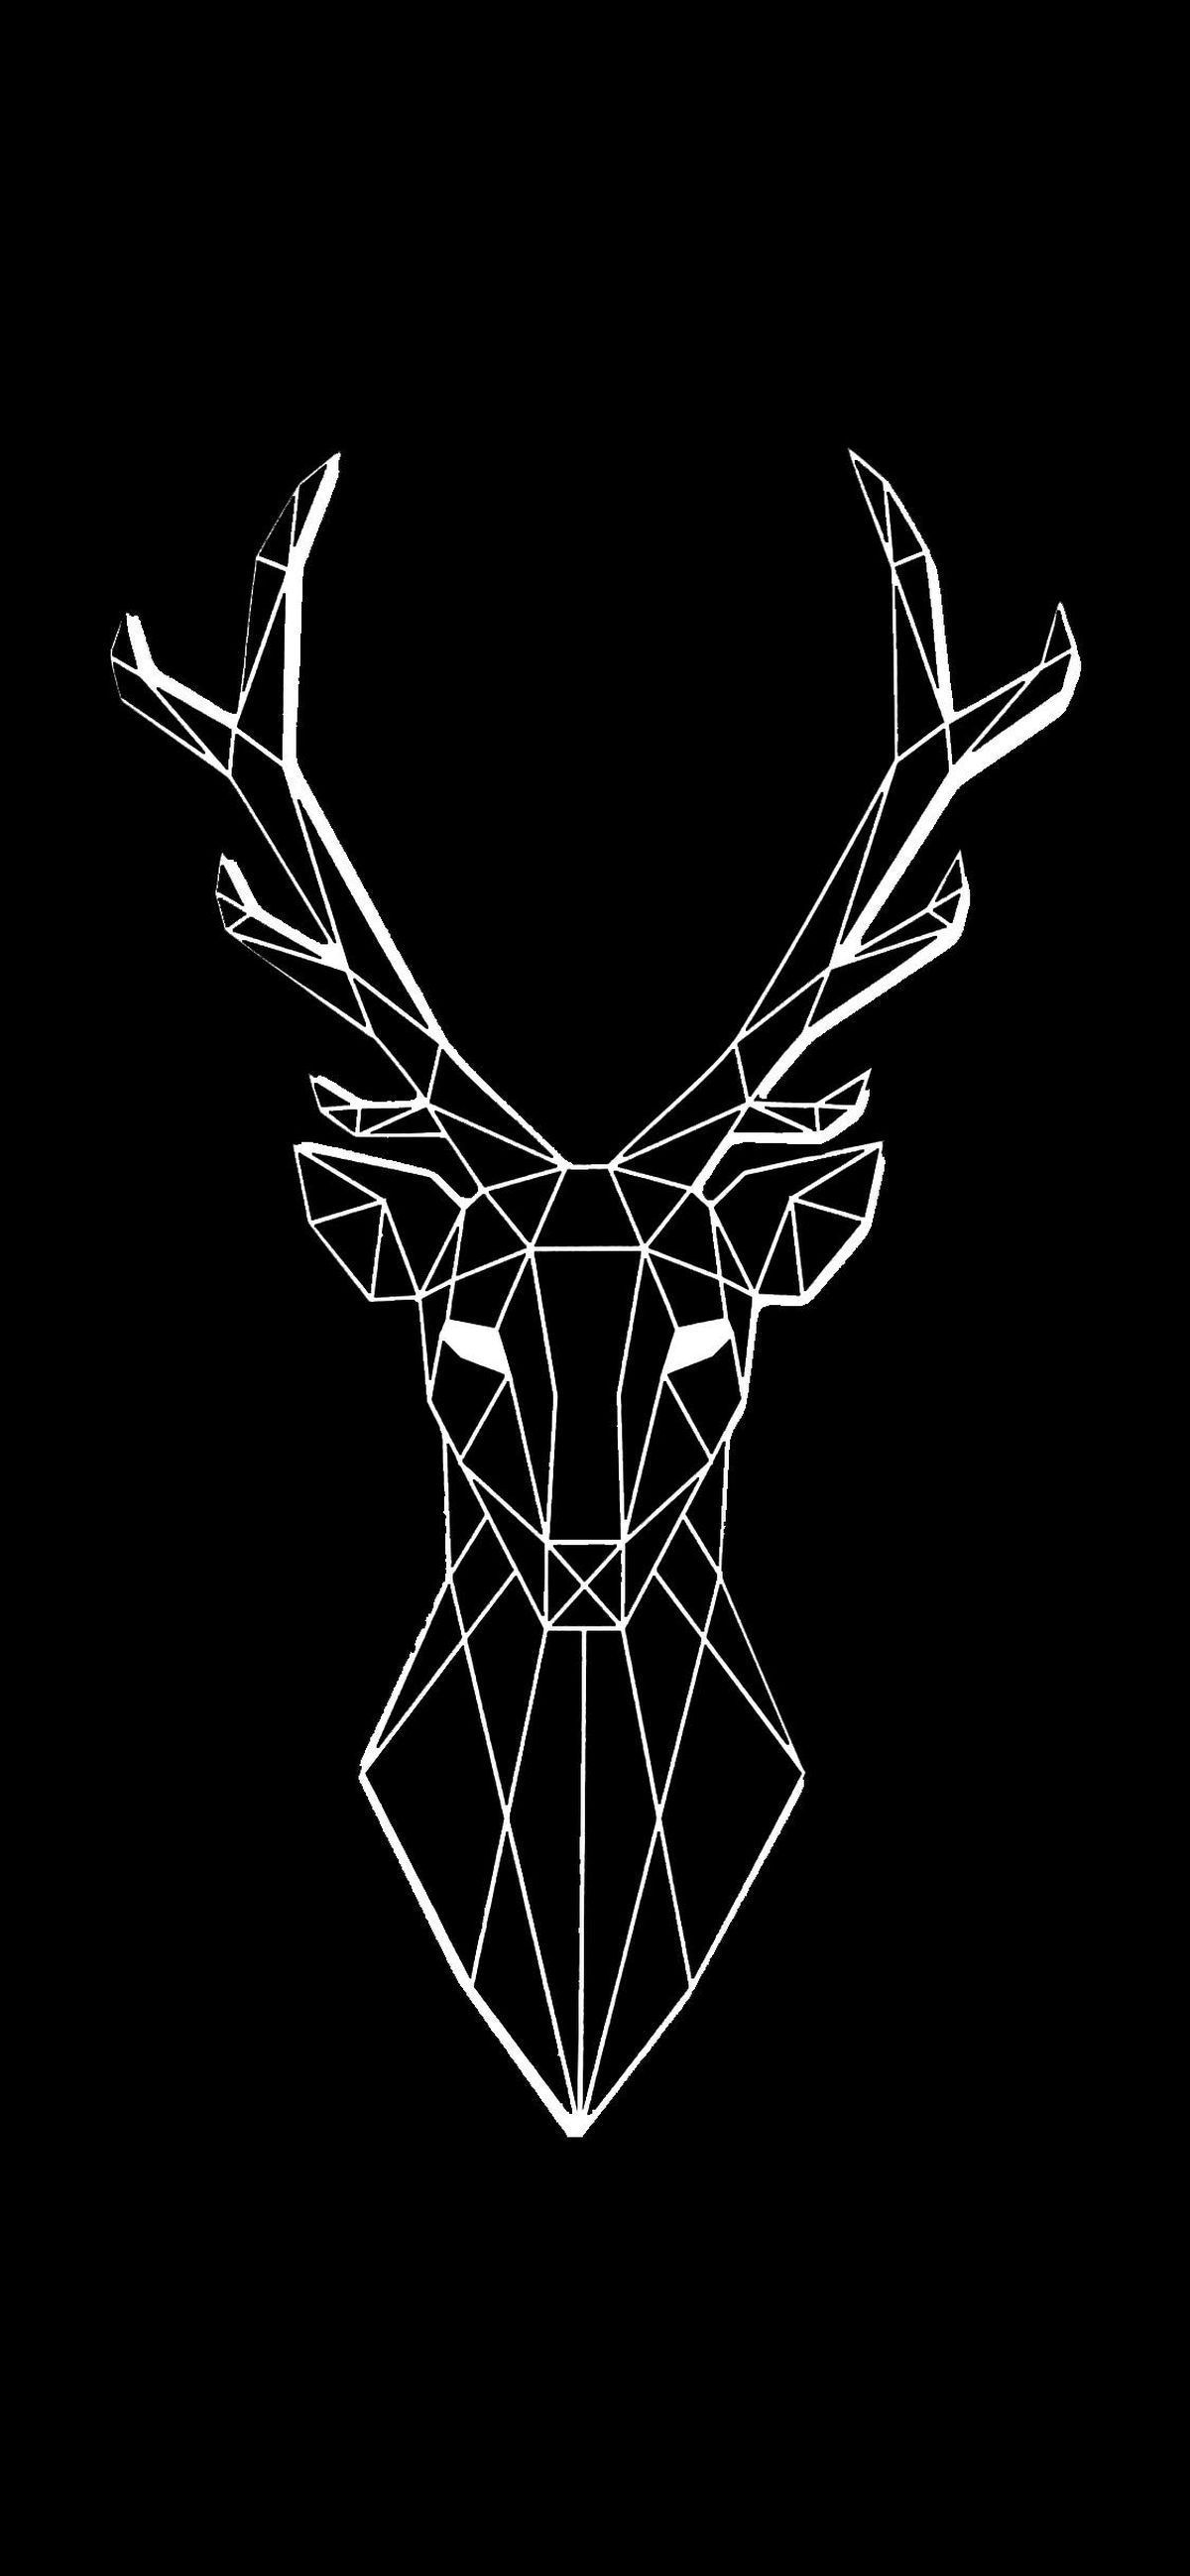 Deer Black and White Wallpaper Free Deer Black and White Background